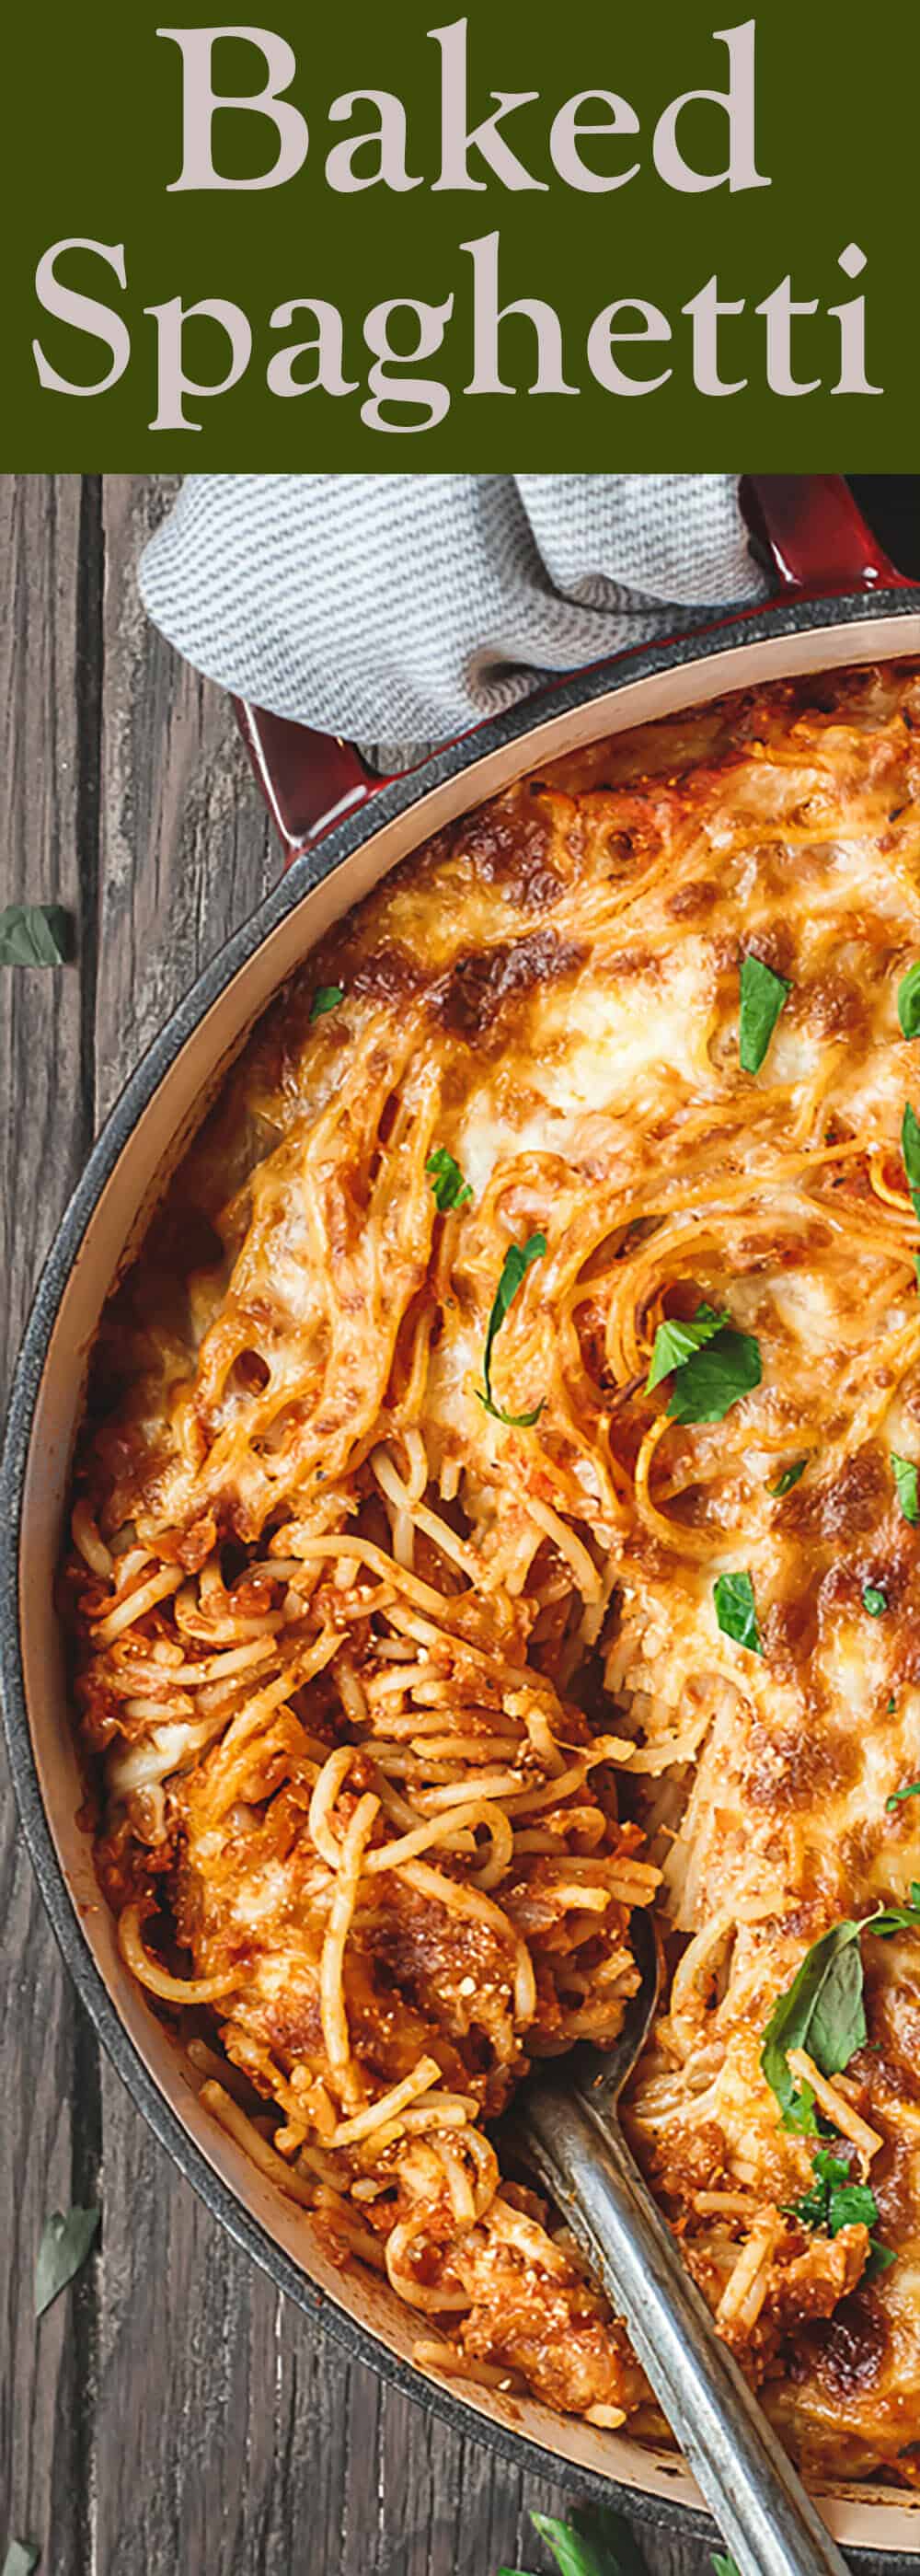 Baked Spaghetti Recipe | The Mediterranean Dish! A hearty baked spaghetti casserole with a lighter cheese mixture and the BEST homemade spaghetti sauce. Recipe on TheMediterraneanDish.com #spaghetti #bakedspaghetti #pasta #casserole